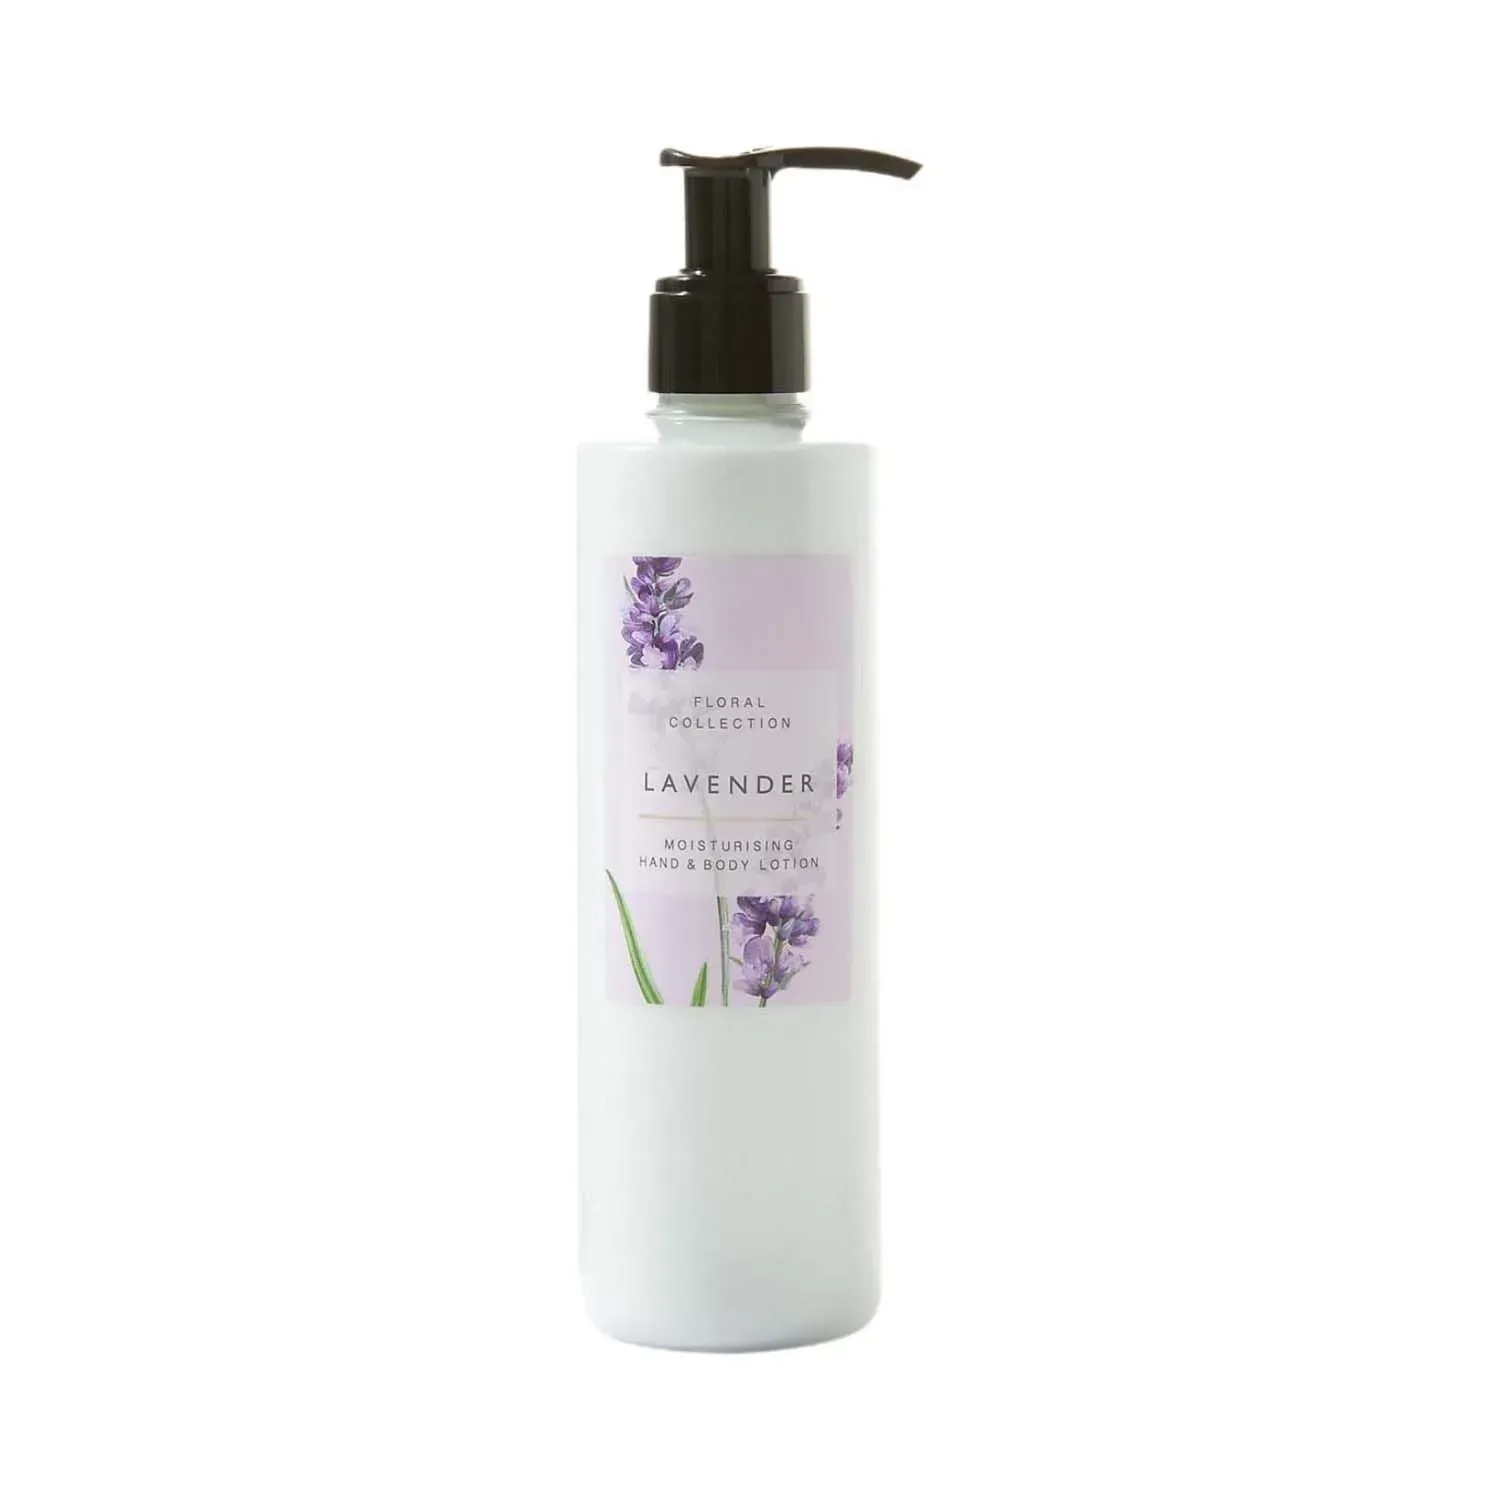 Marks & Spencer Lavender Hand And Body Lotion - (250ml)